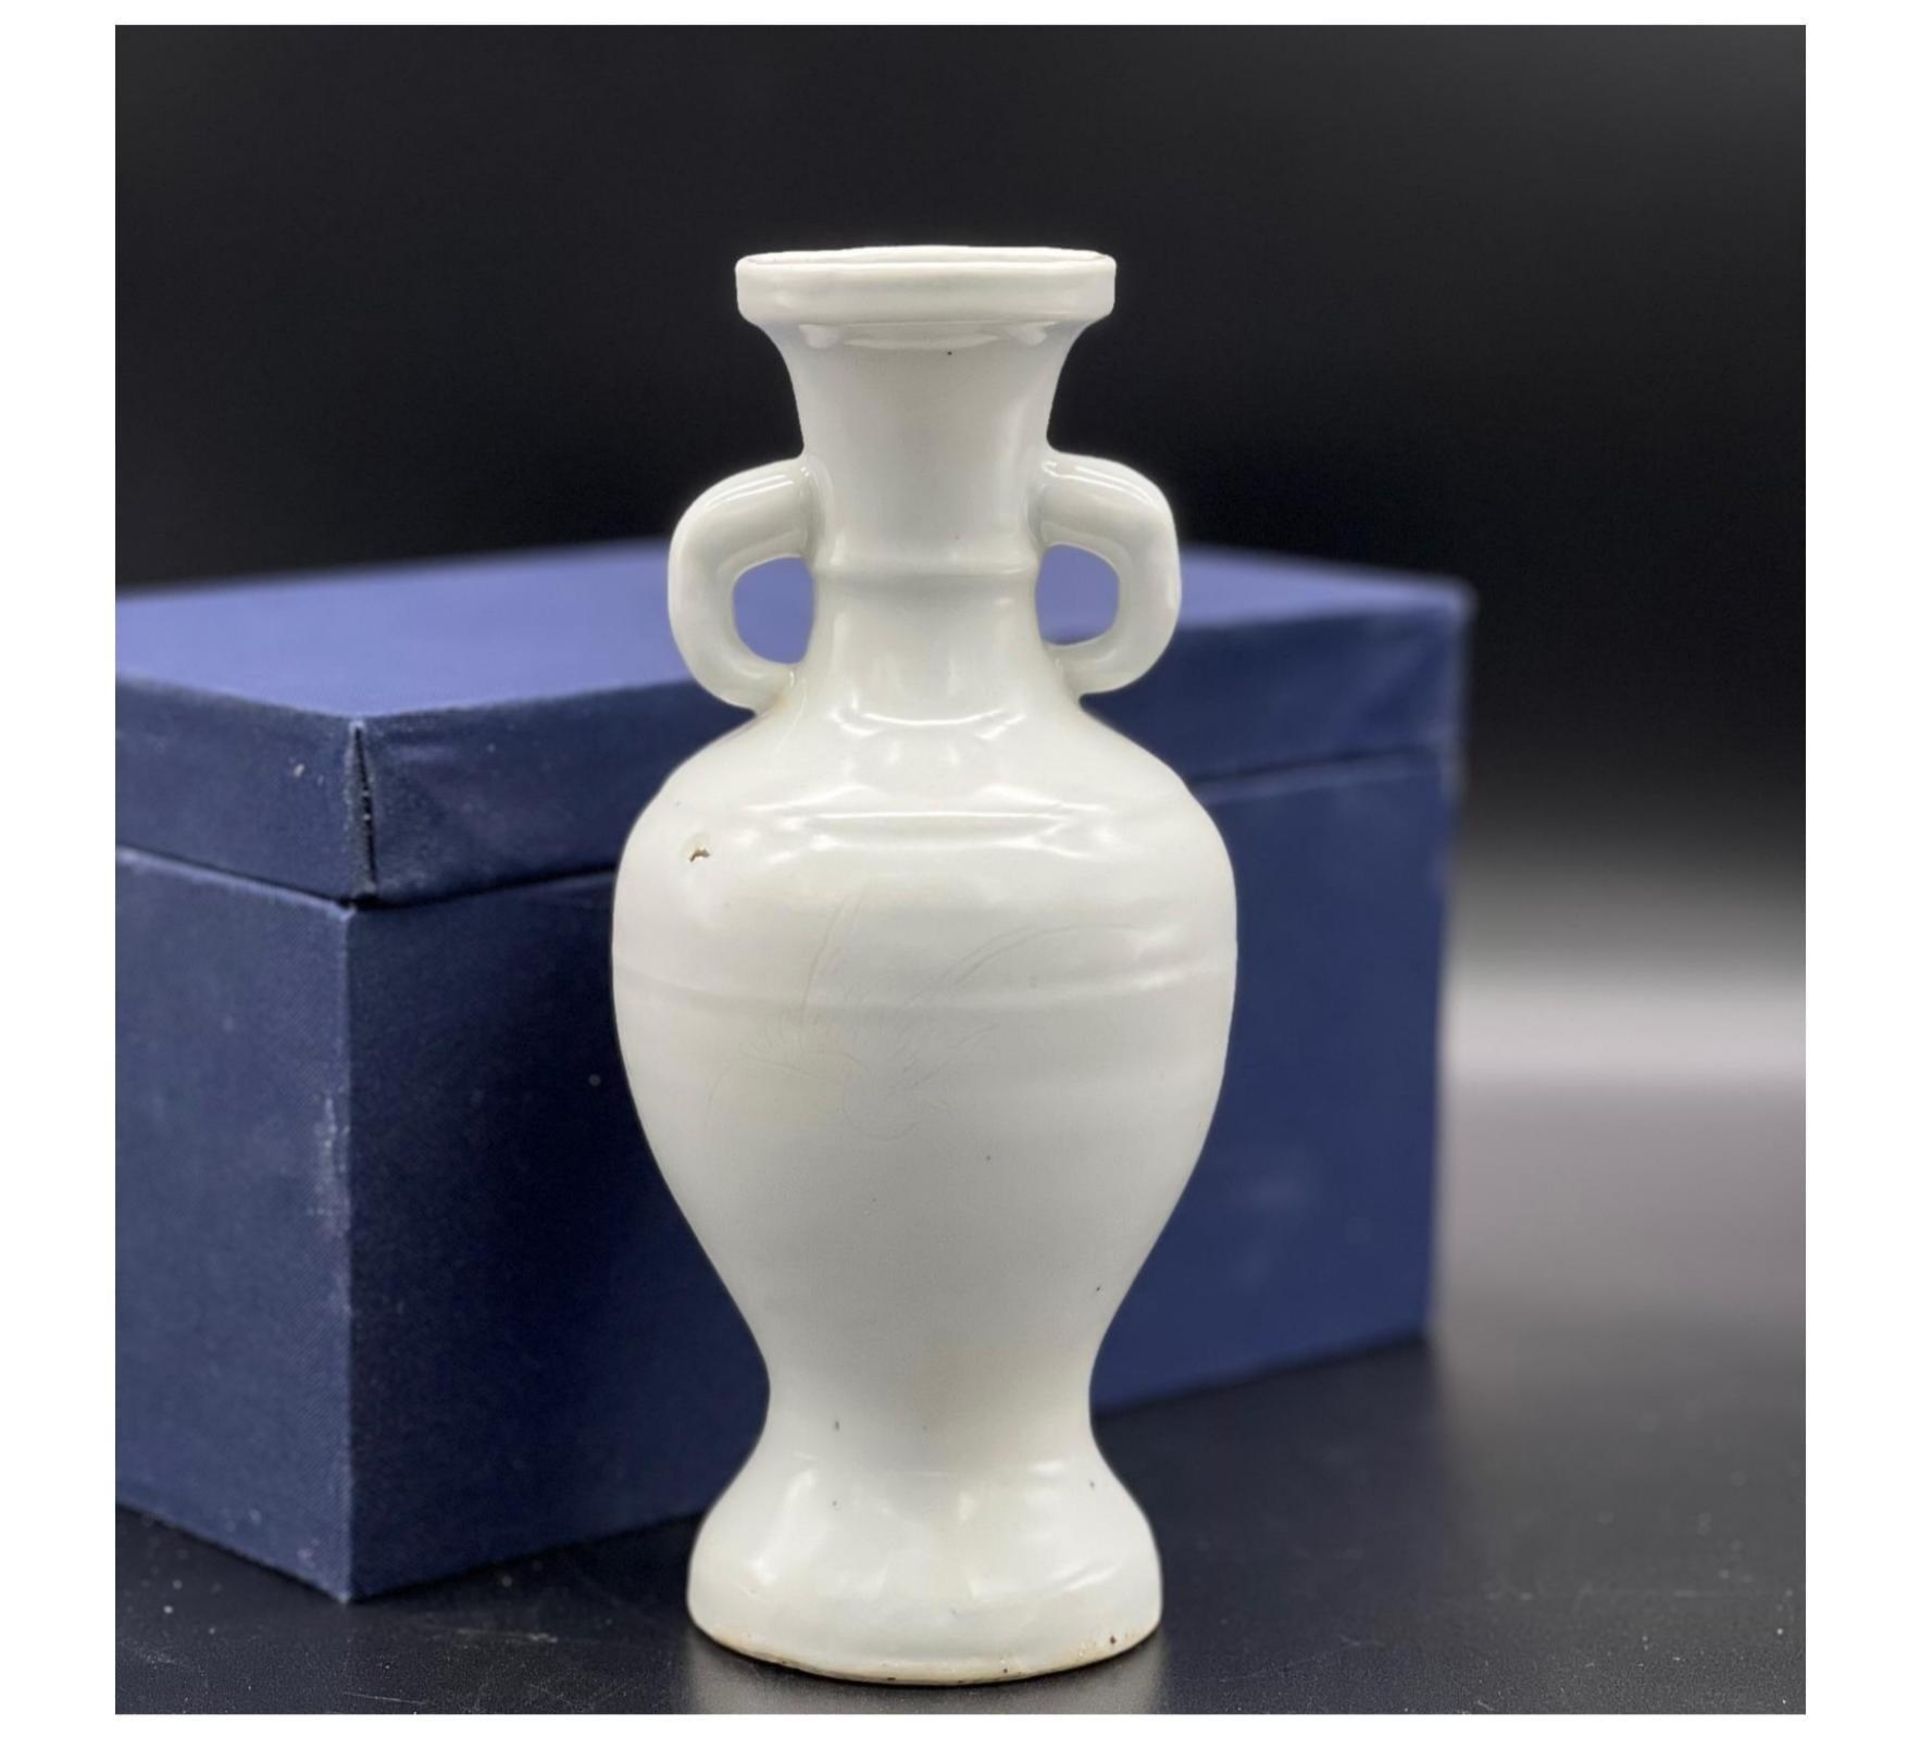 A “sweet white” glazed two-handled vase with flower and bird pattern, Late Ming Dynasty. Minor